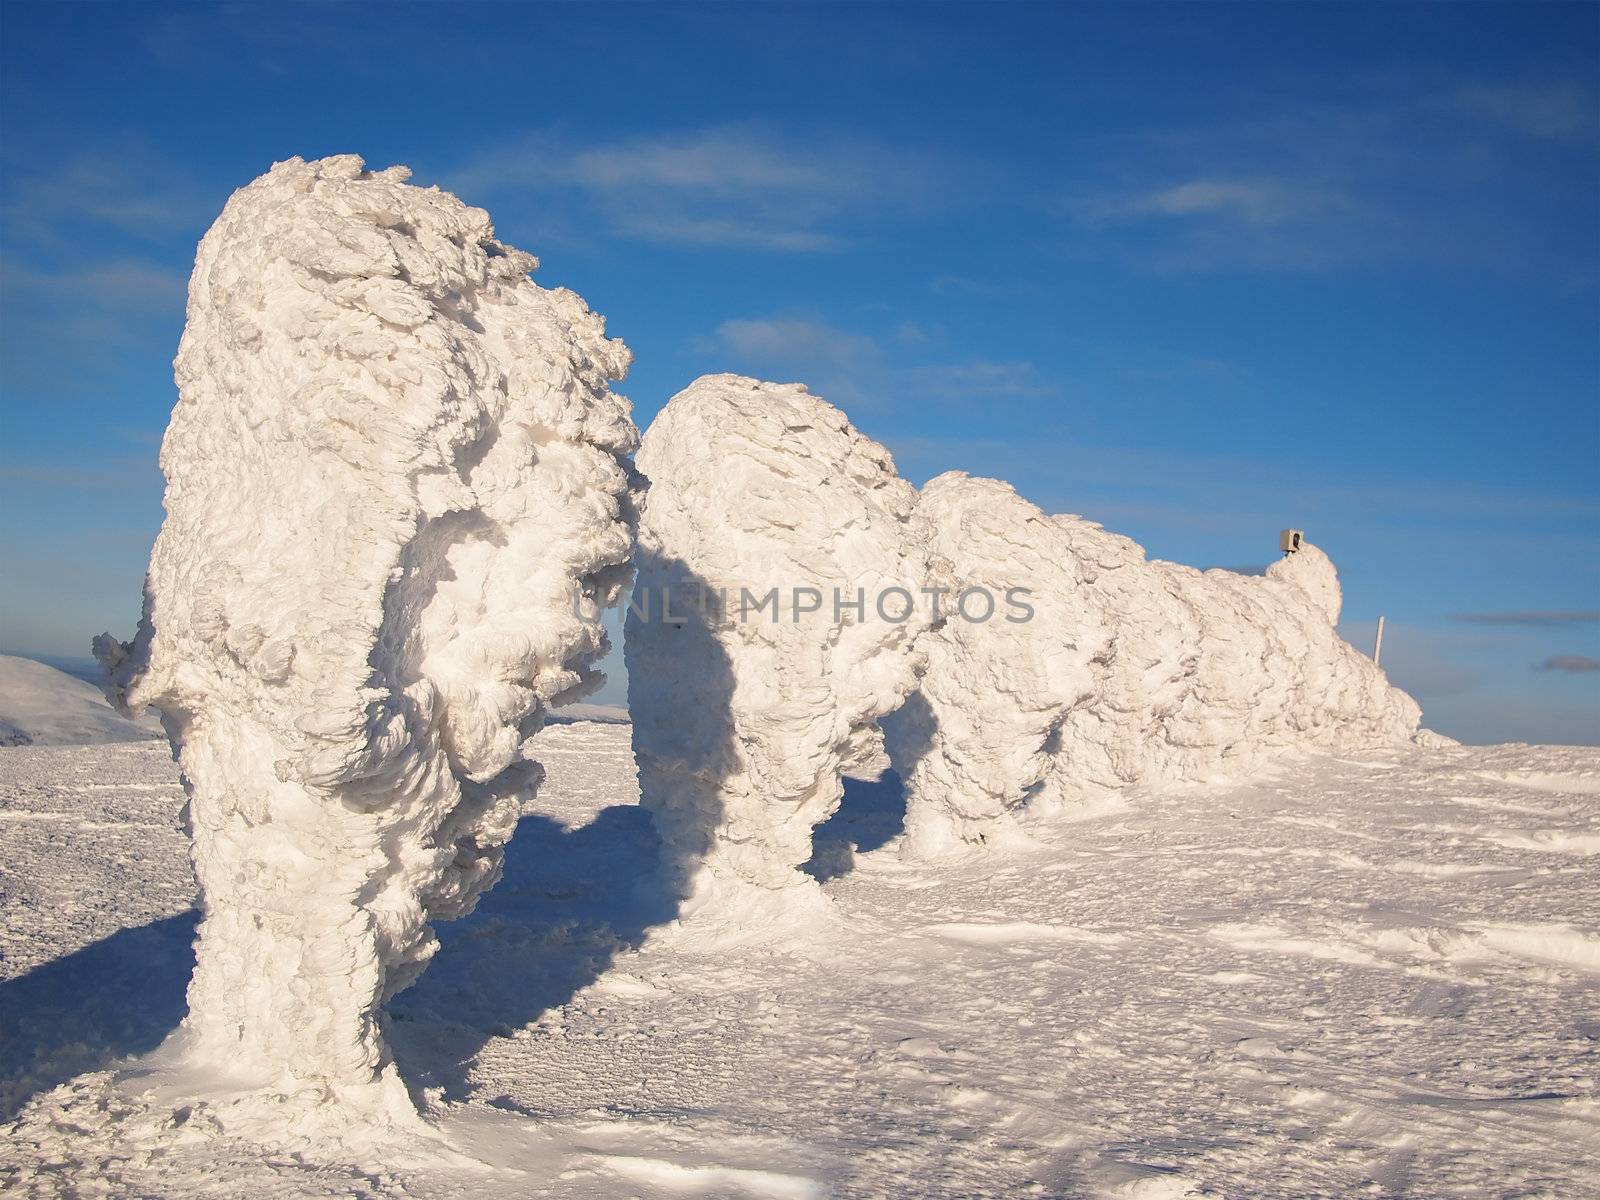 Snow sculptures in Lapland by pljvv